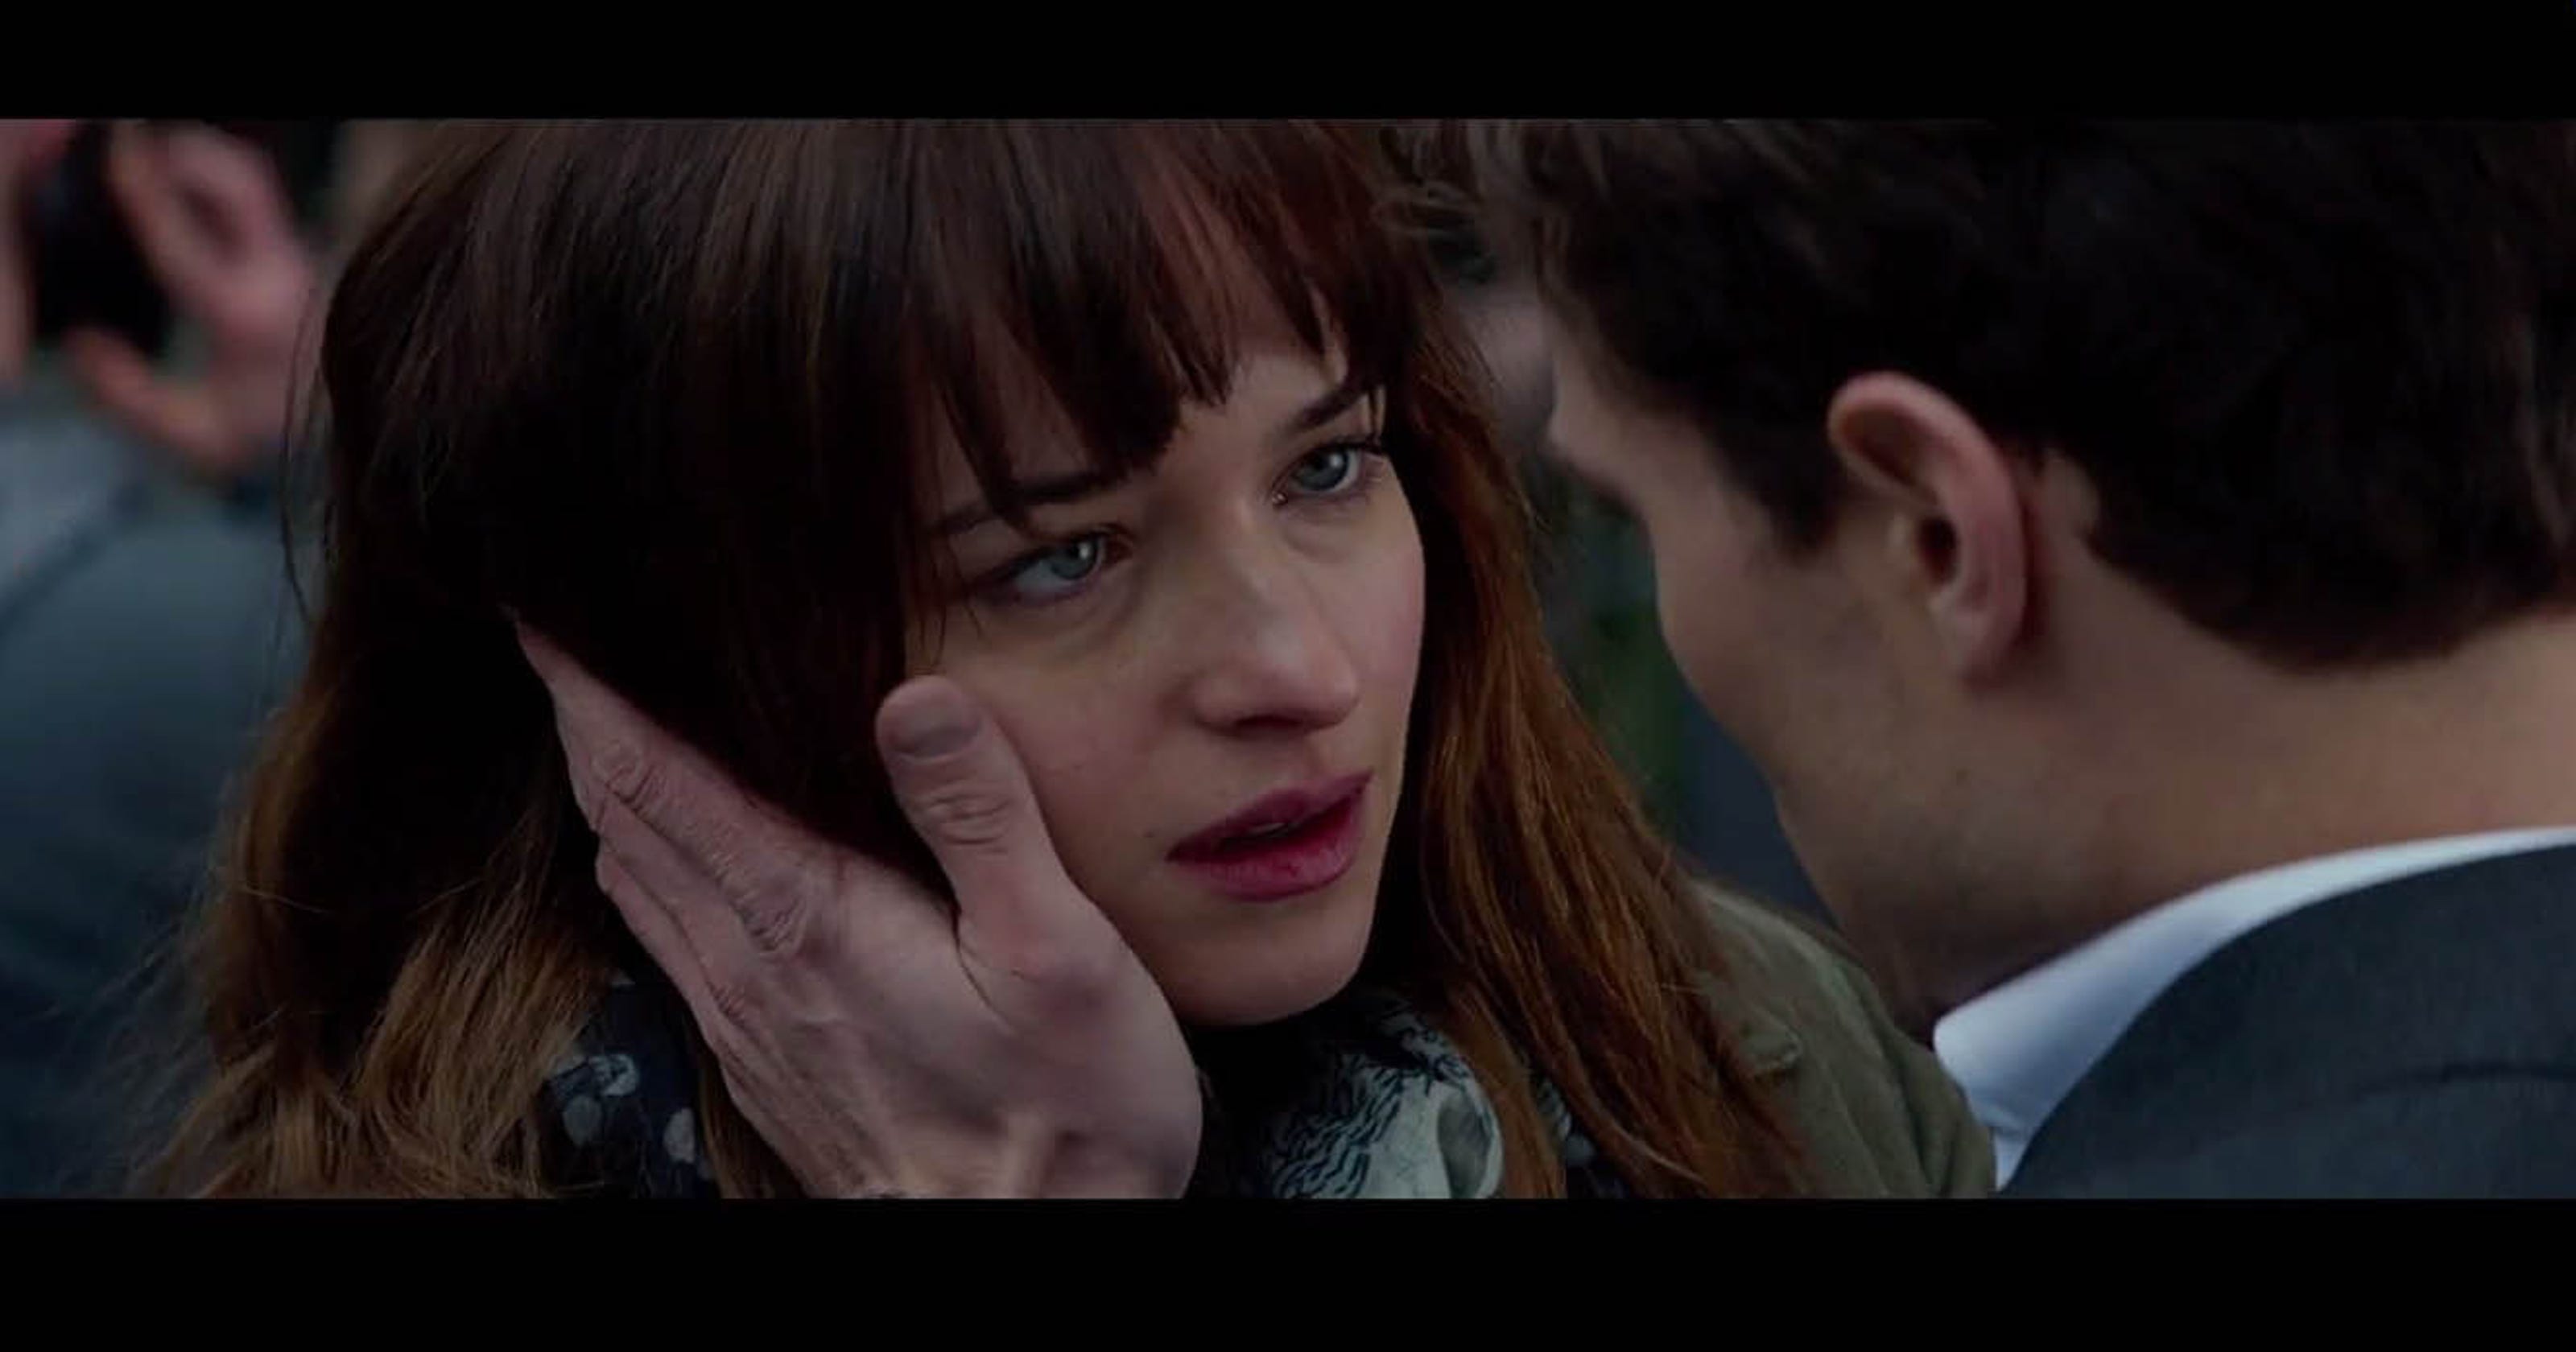 Oh my Watch steamy new 'Fifty Shades of Grey' trailer